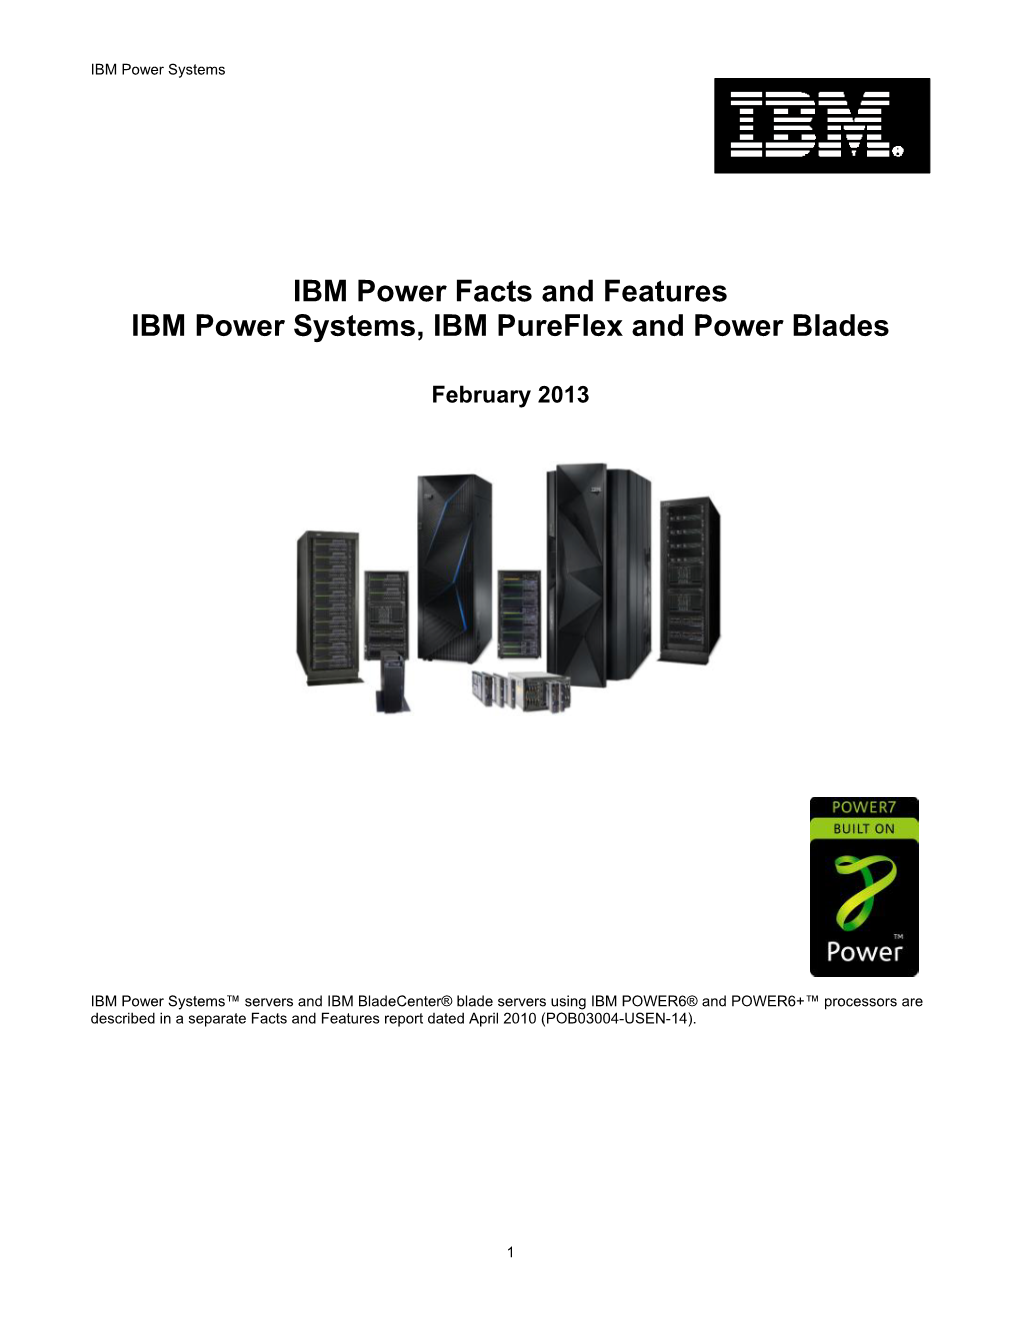 IBM Power Facts and Features IBM Power Systems, IBM Pureflex and Power Blades